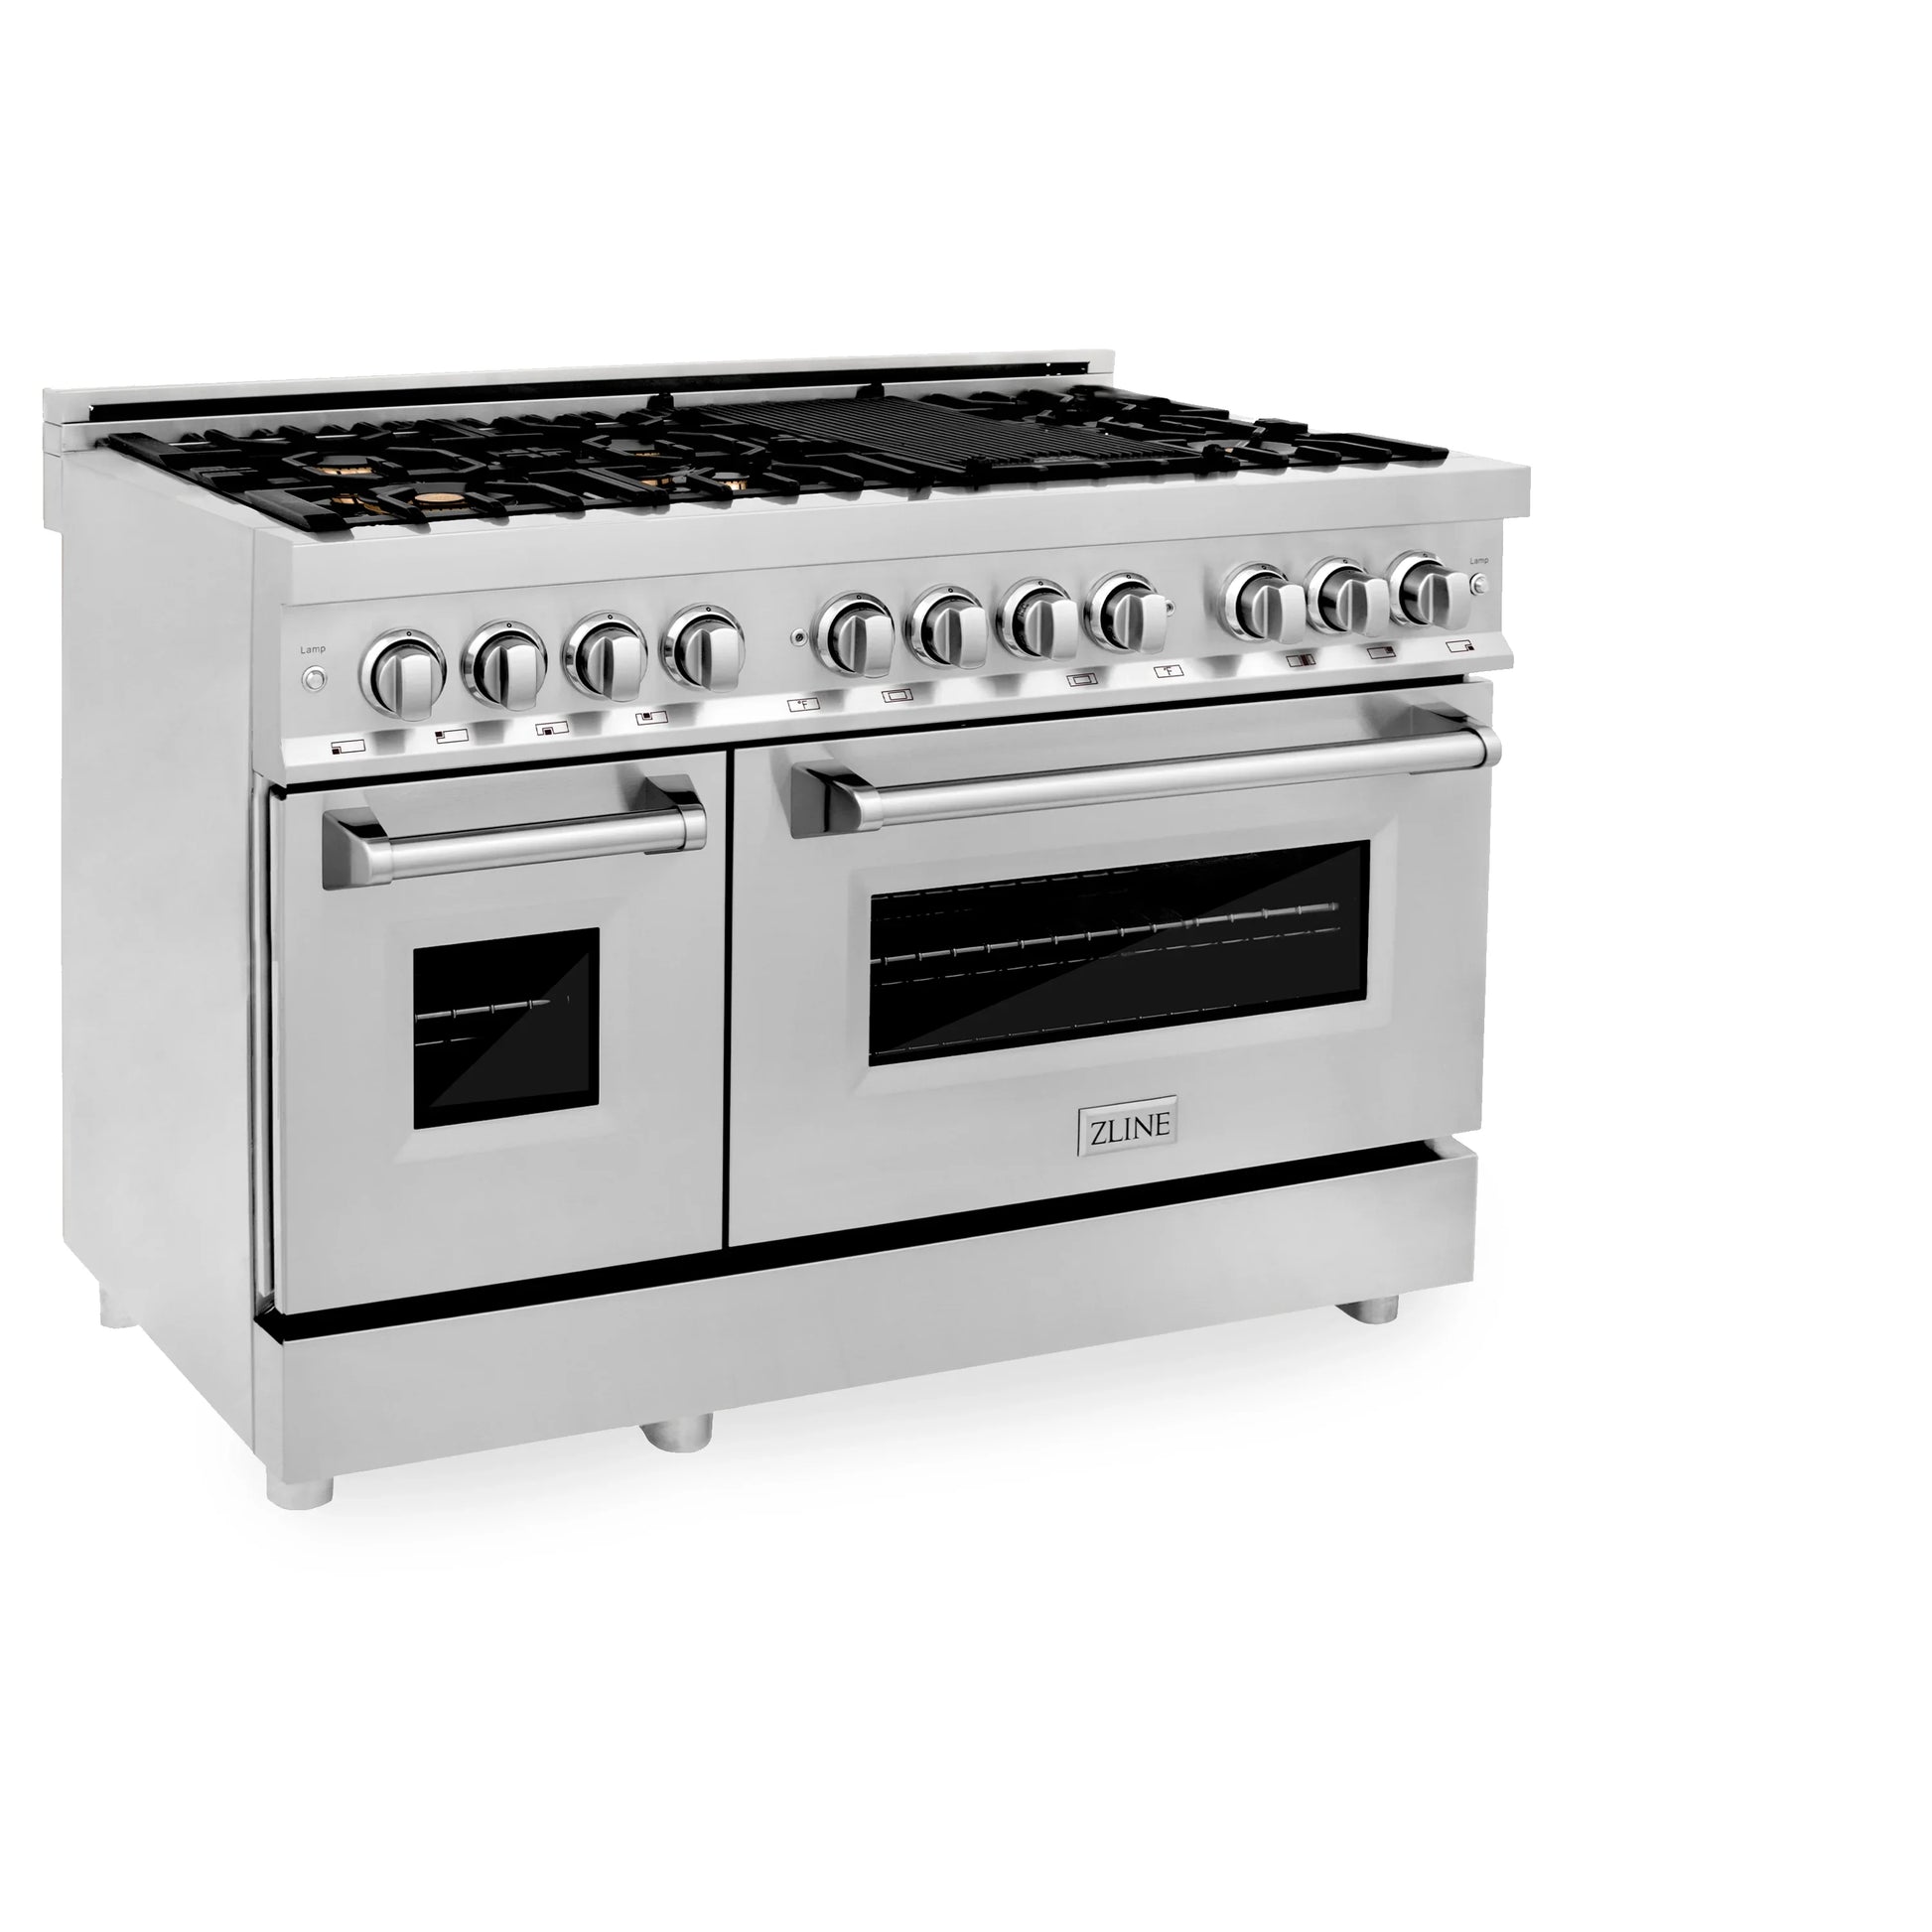 ZLINE 48" Dual Fuel Range - Stainless Steel with Brass Burners, Gas Stove, and Electric Oven